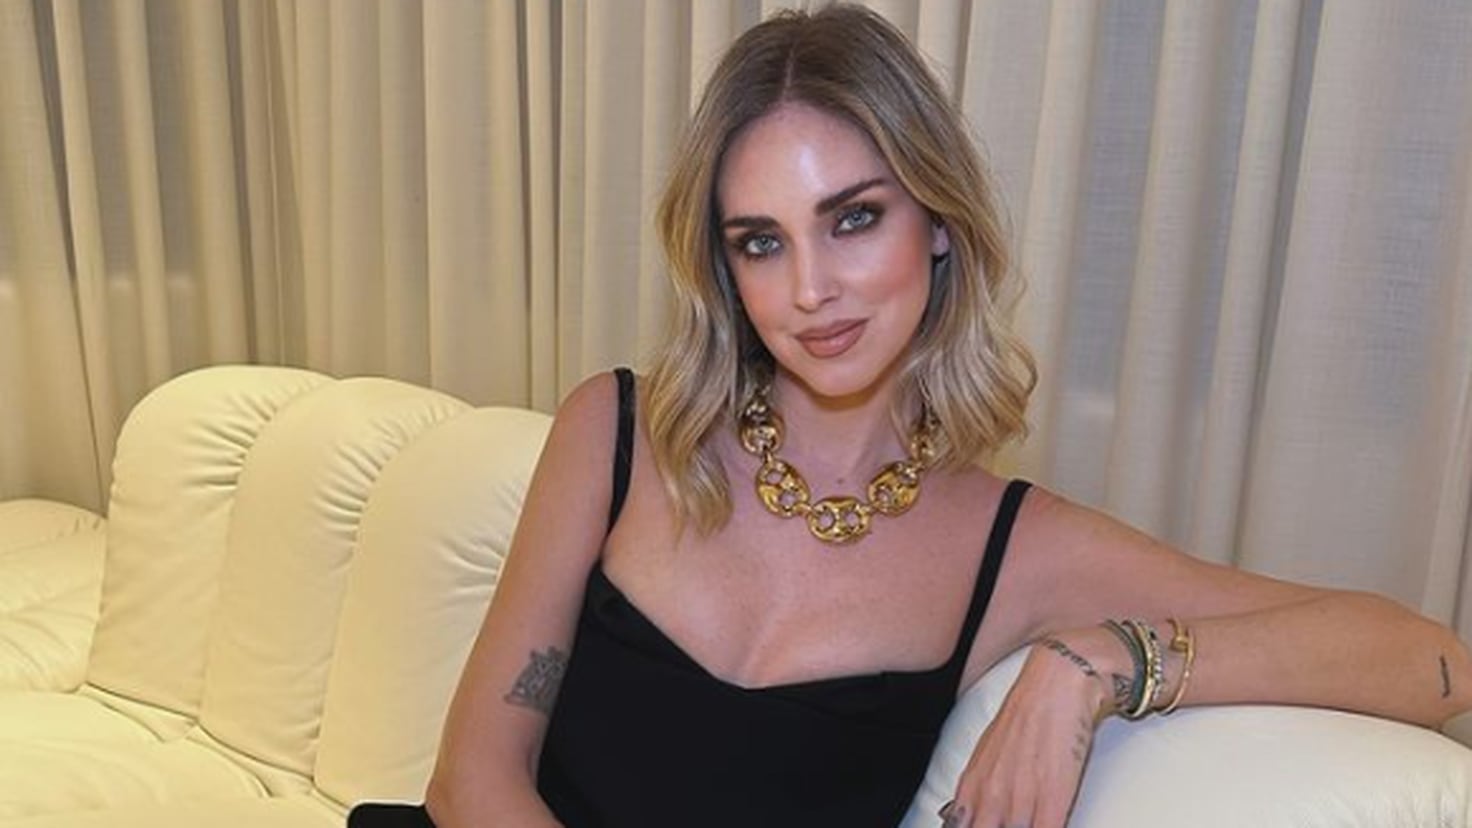 Chiara Ferragni's hell continues: the Prosecutor's Office investigates another of her campaigns
